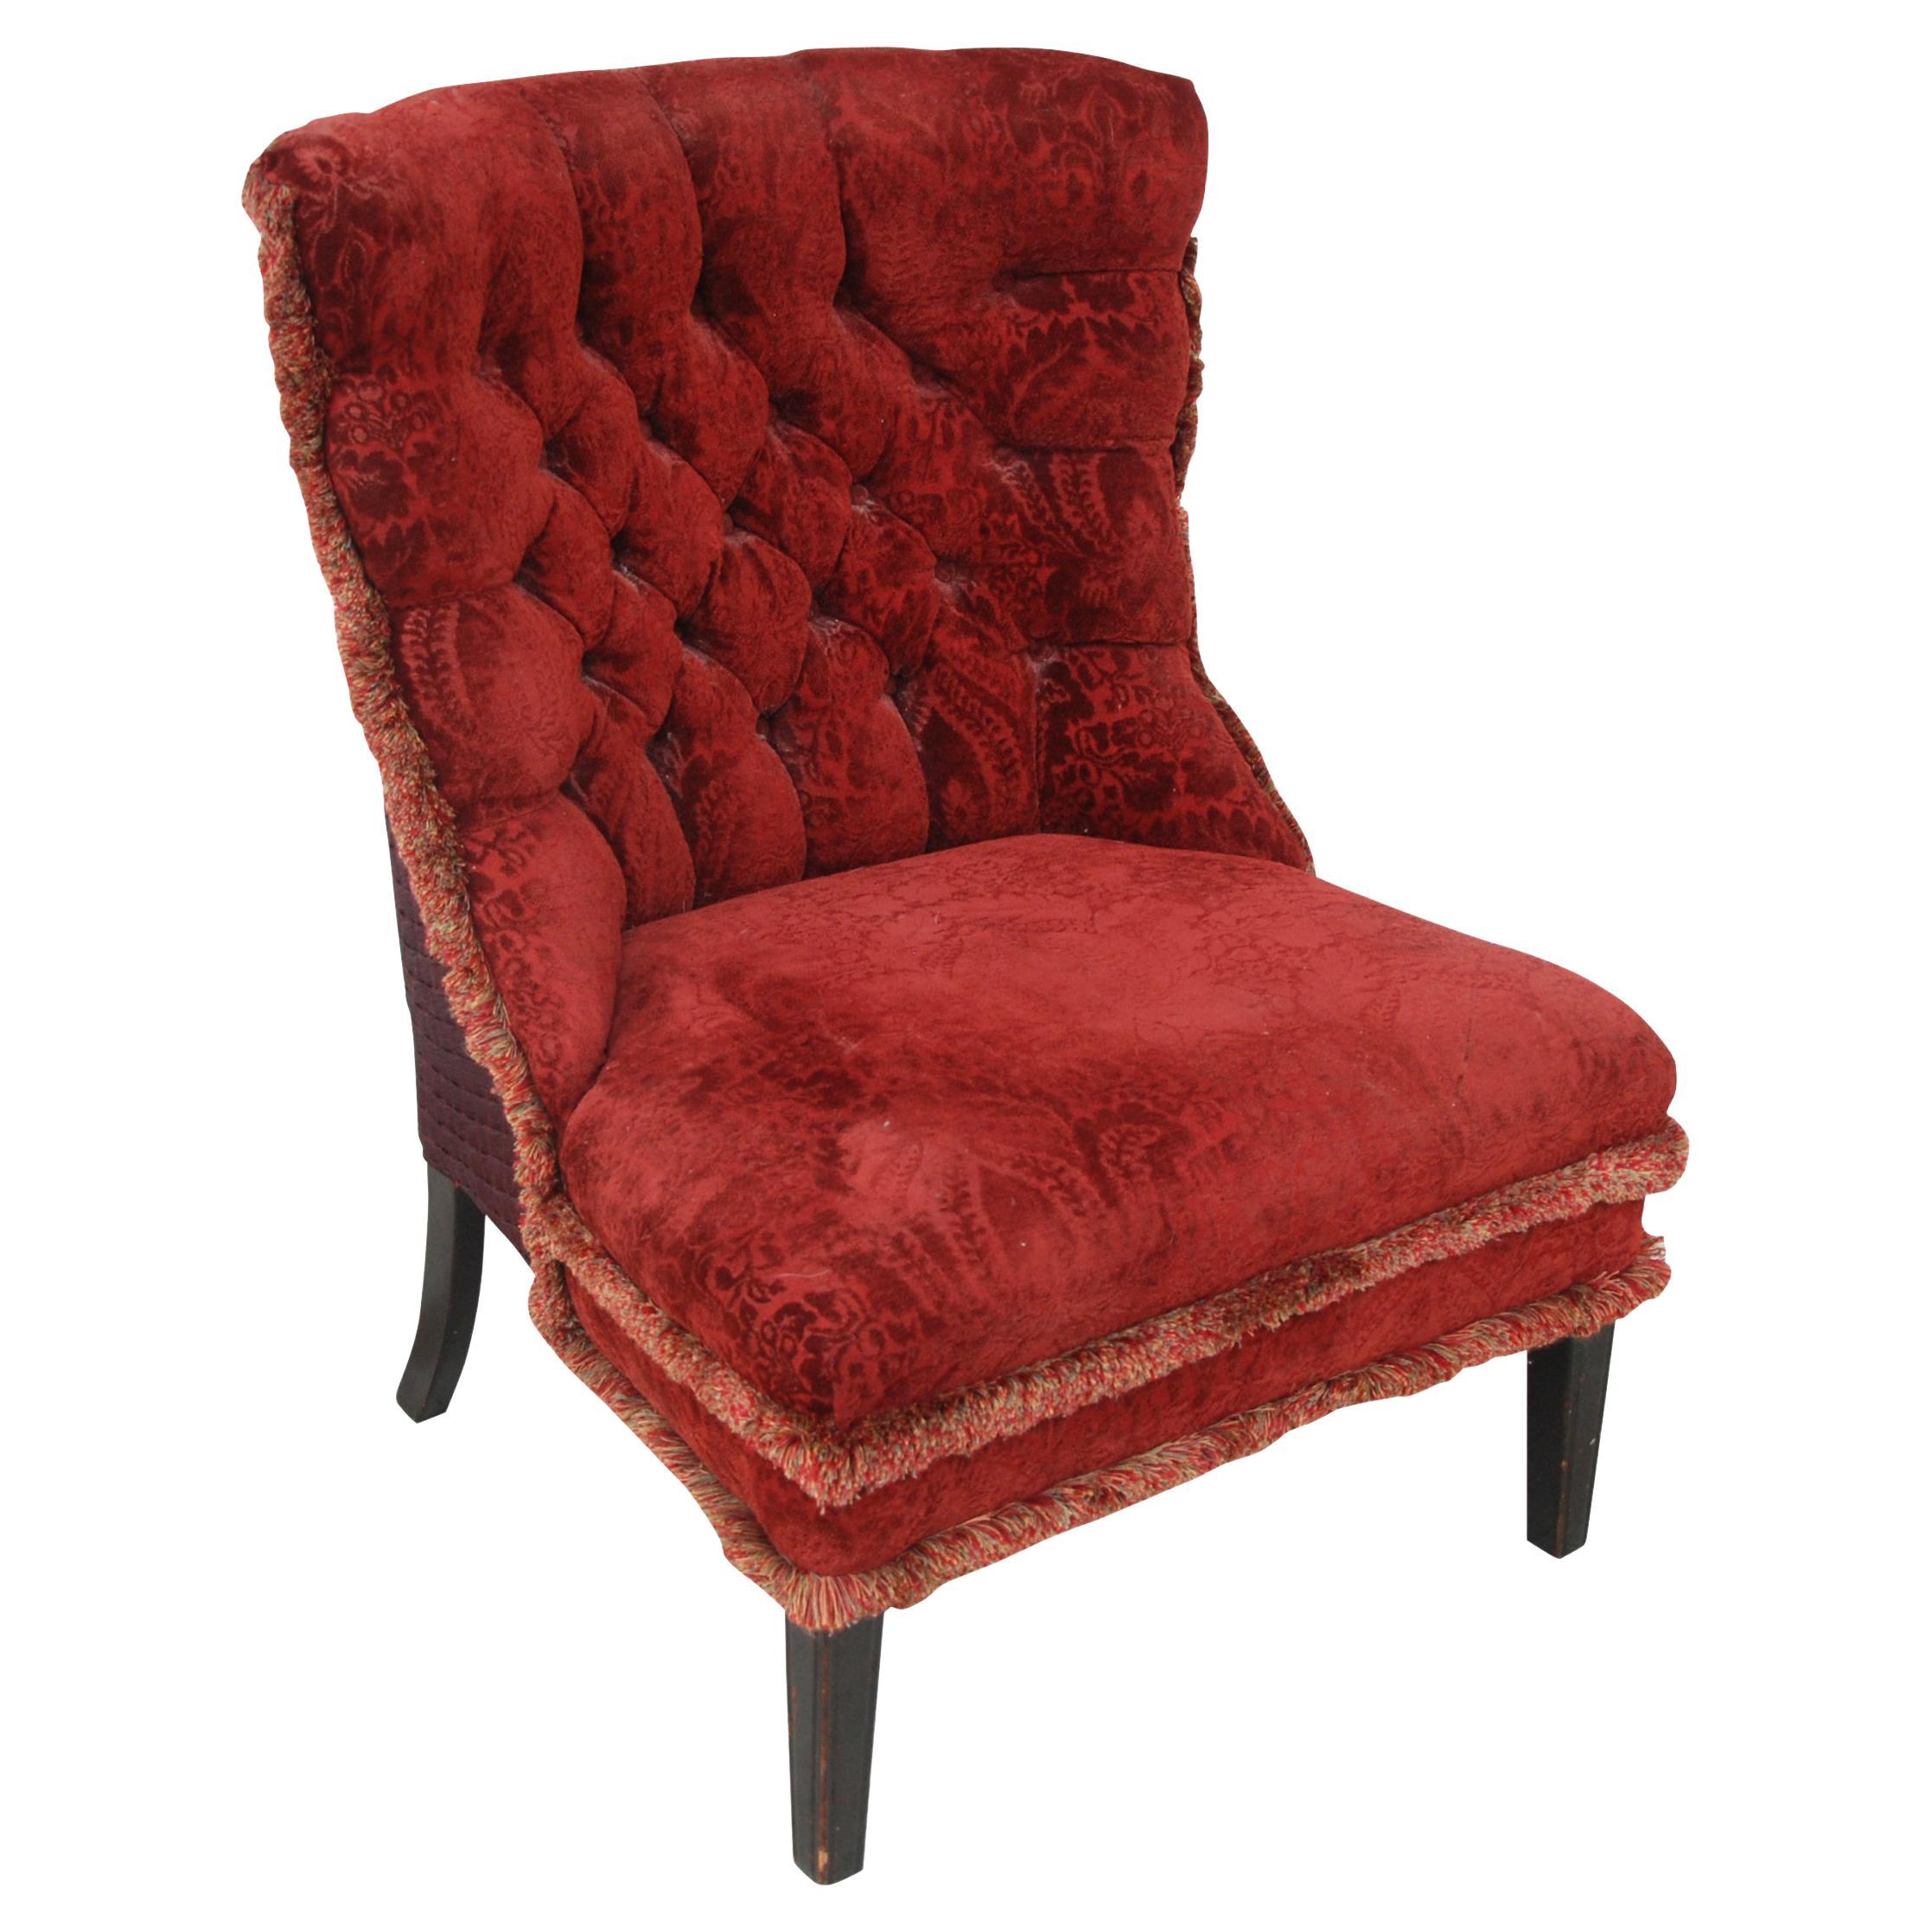 Vintage Victorian Style Slipper Chair with Tufting